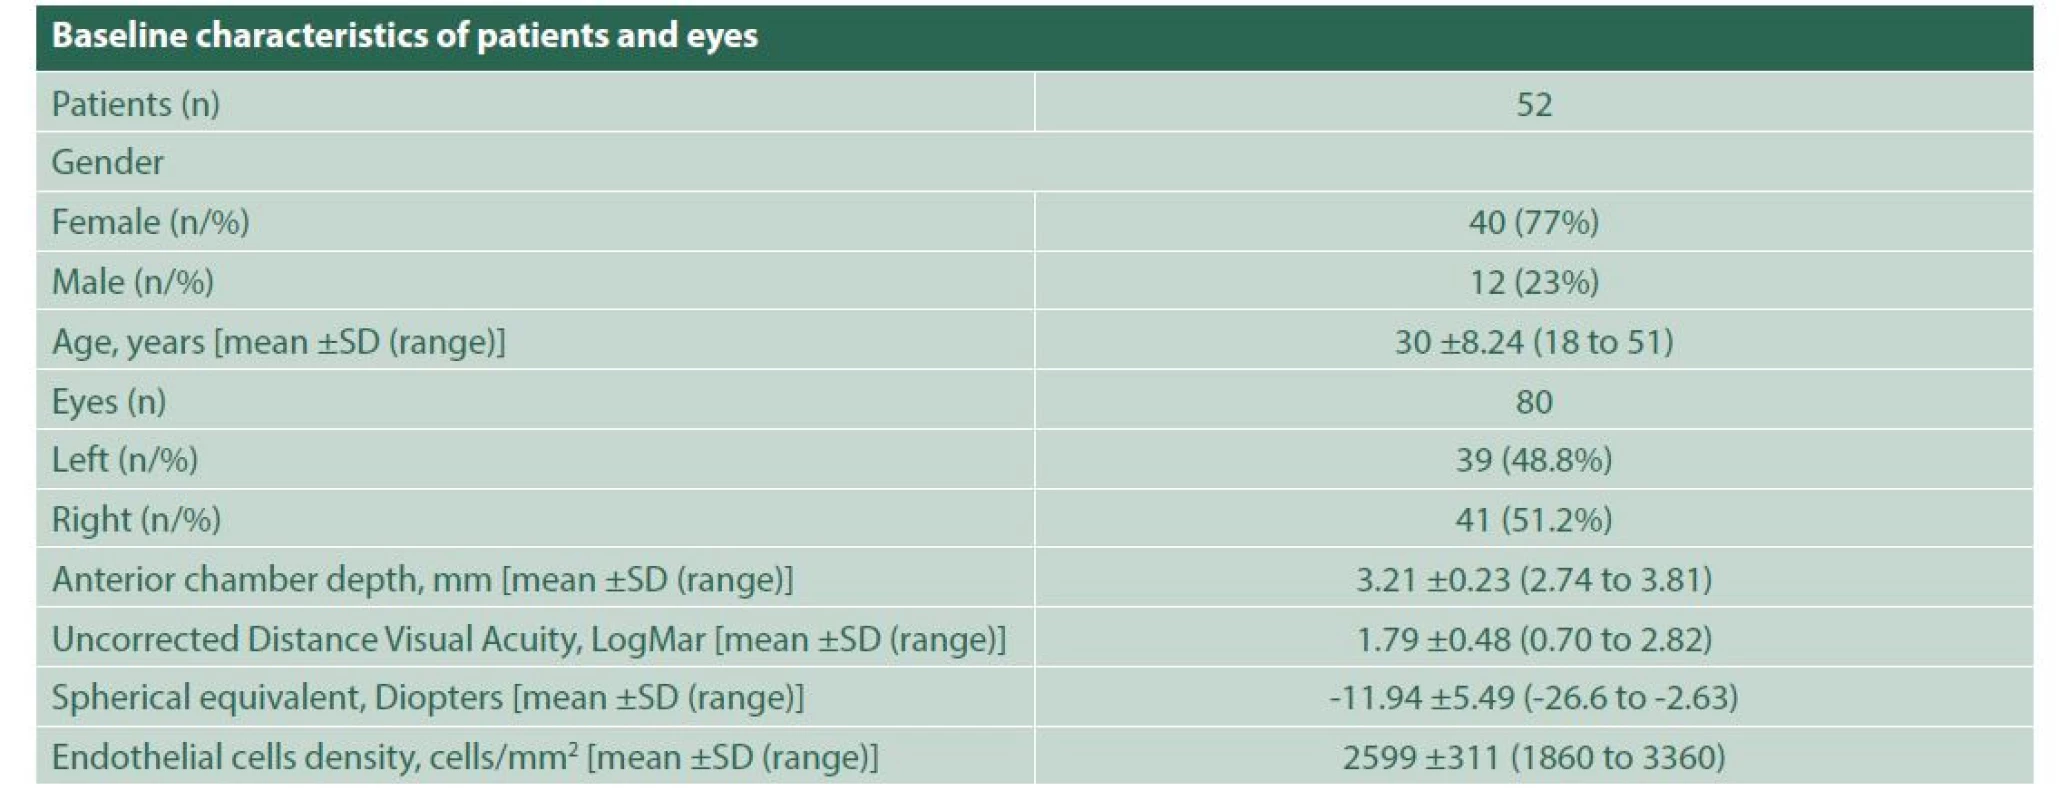 Baseline characteristics of patients and eyes